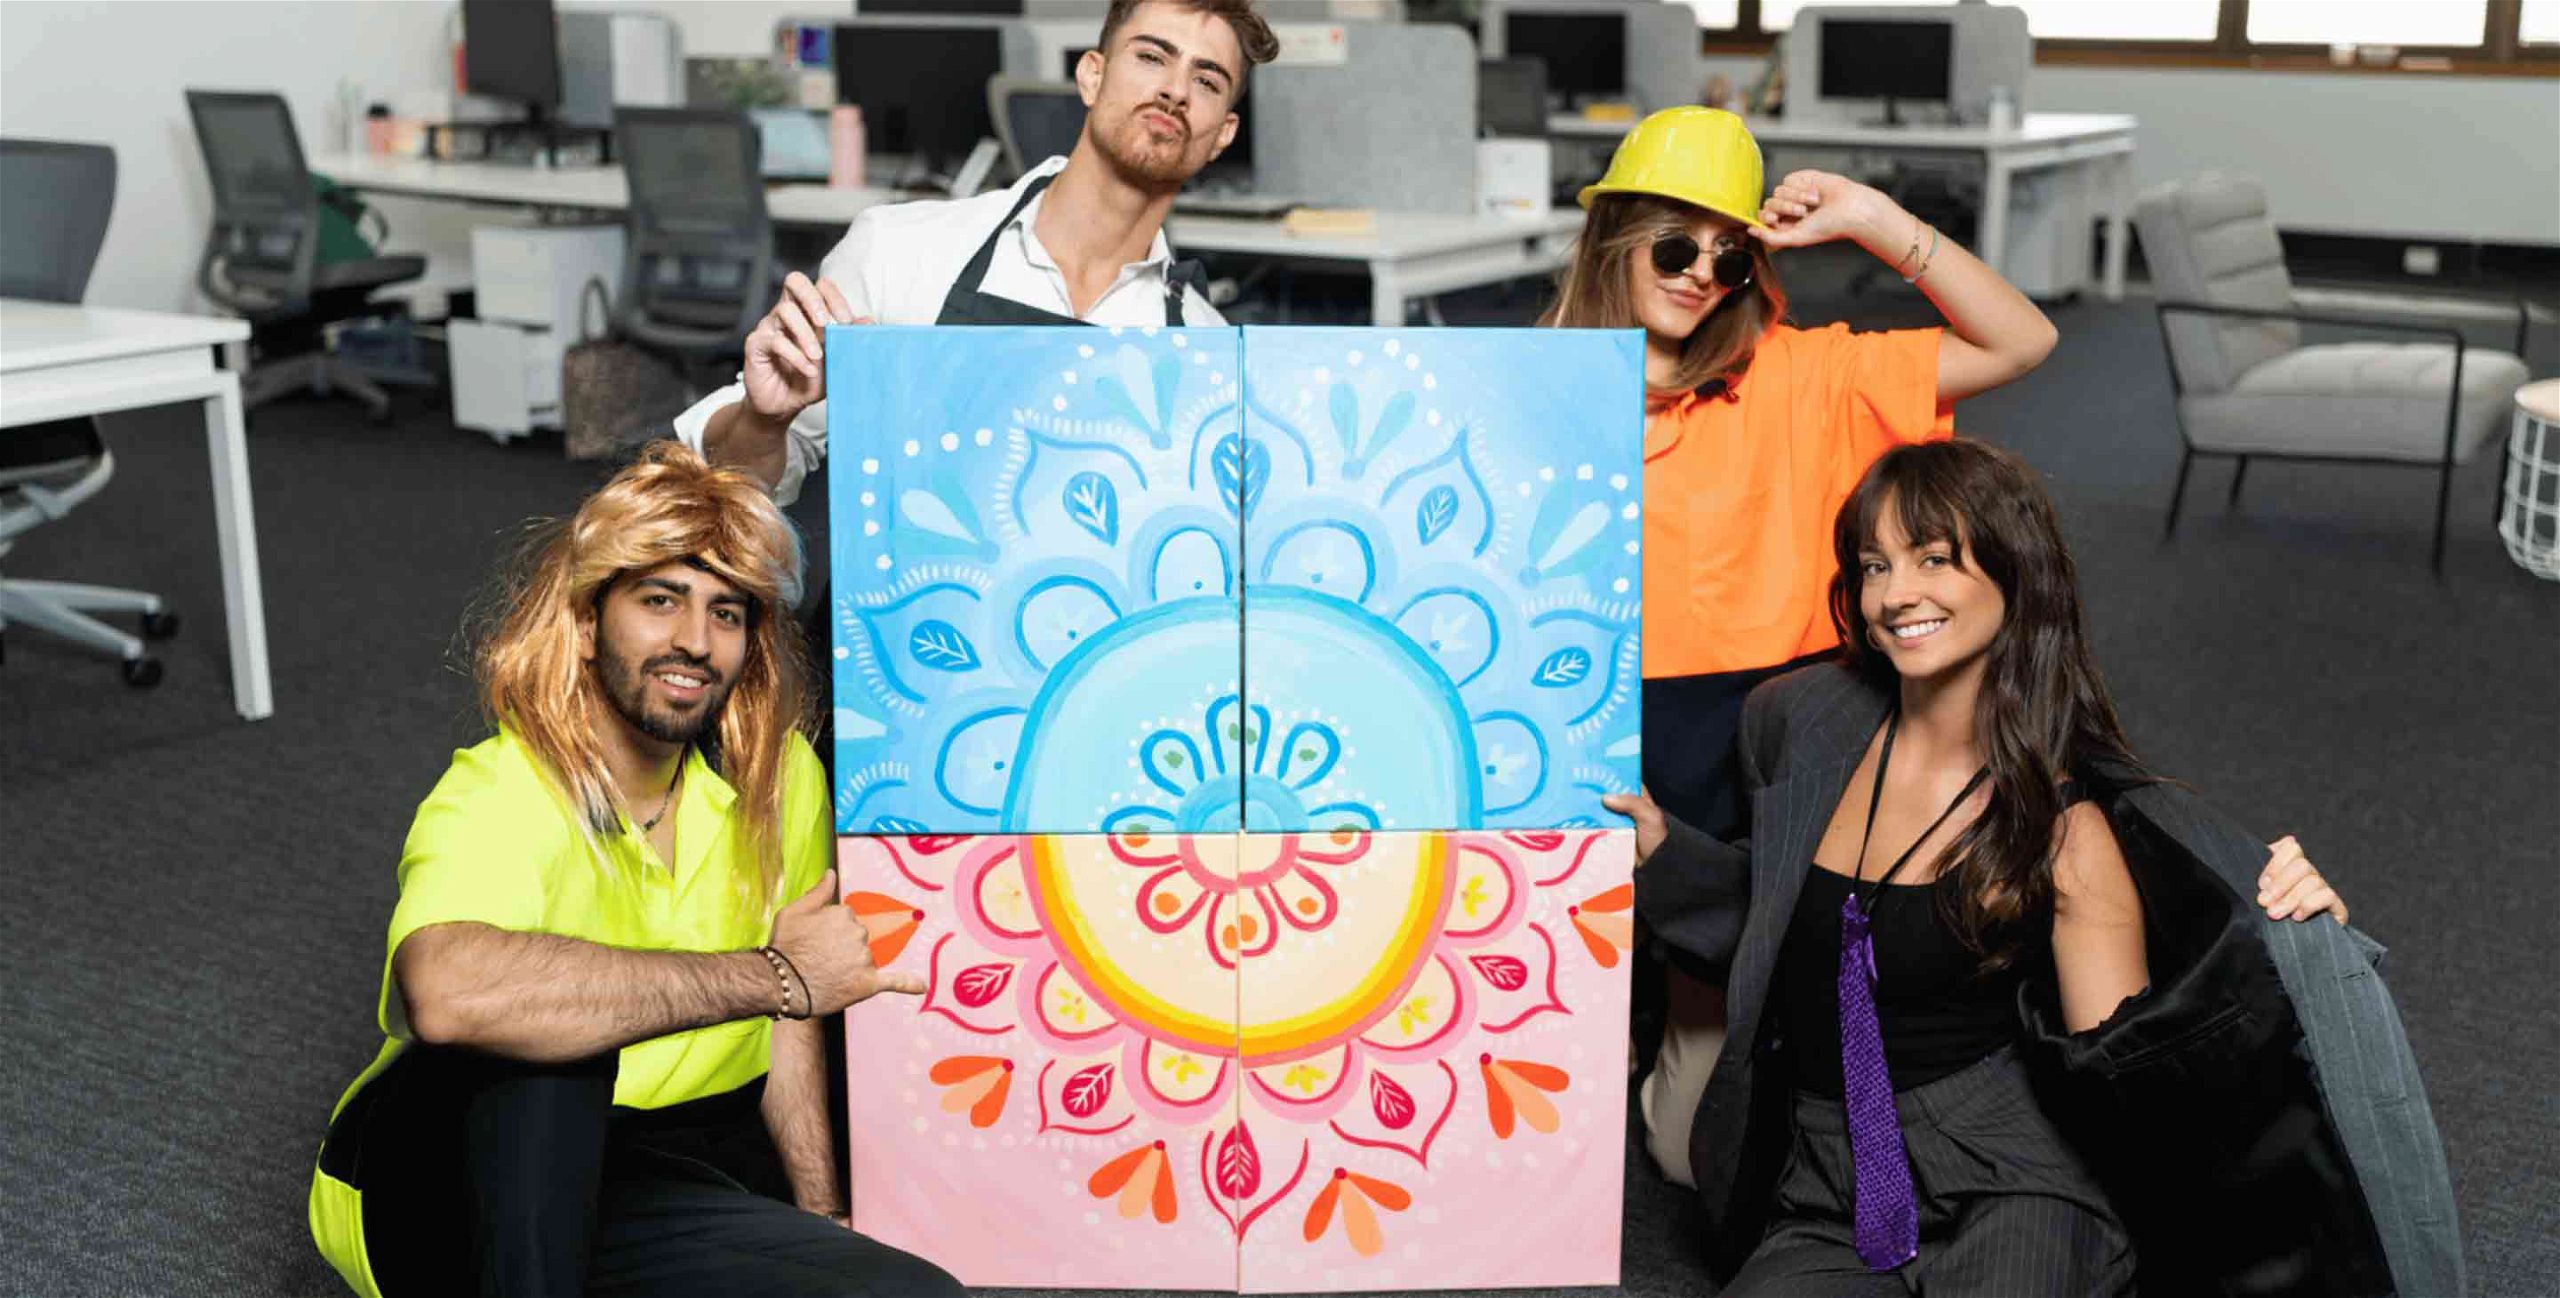 Team Building Activities Australia. Corporate events where everyone can paint together to create an artwork masterpiece at Pinot and Picasso